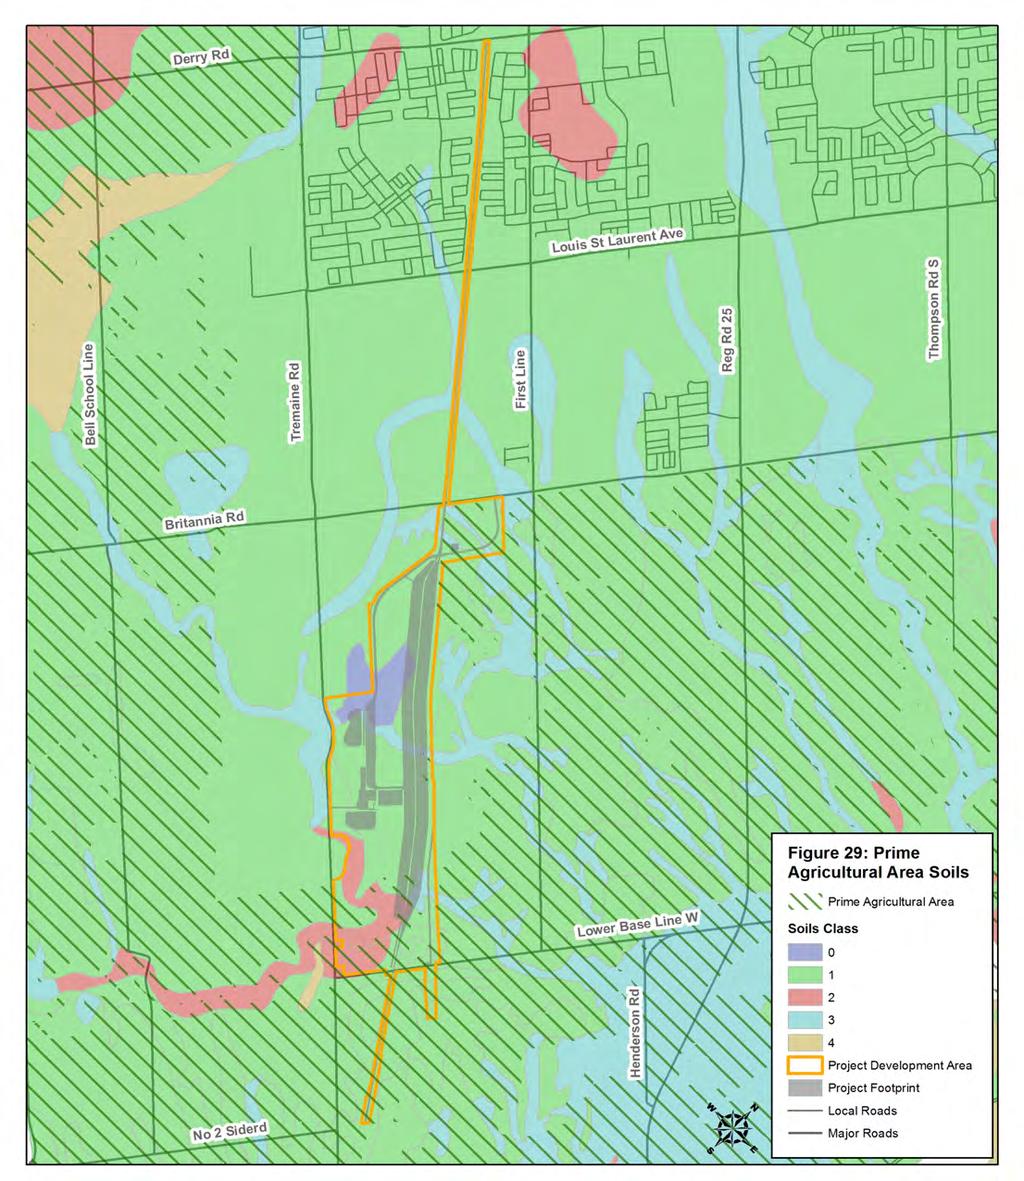 29 HALTON MUNICIPALITIES BRIEF: APPENDIX A Project location in relation to soil quality and designated Prime Agricultural Areas in the Regional Official Plan.